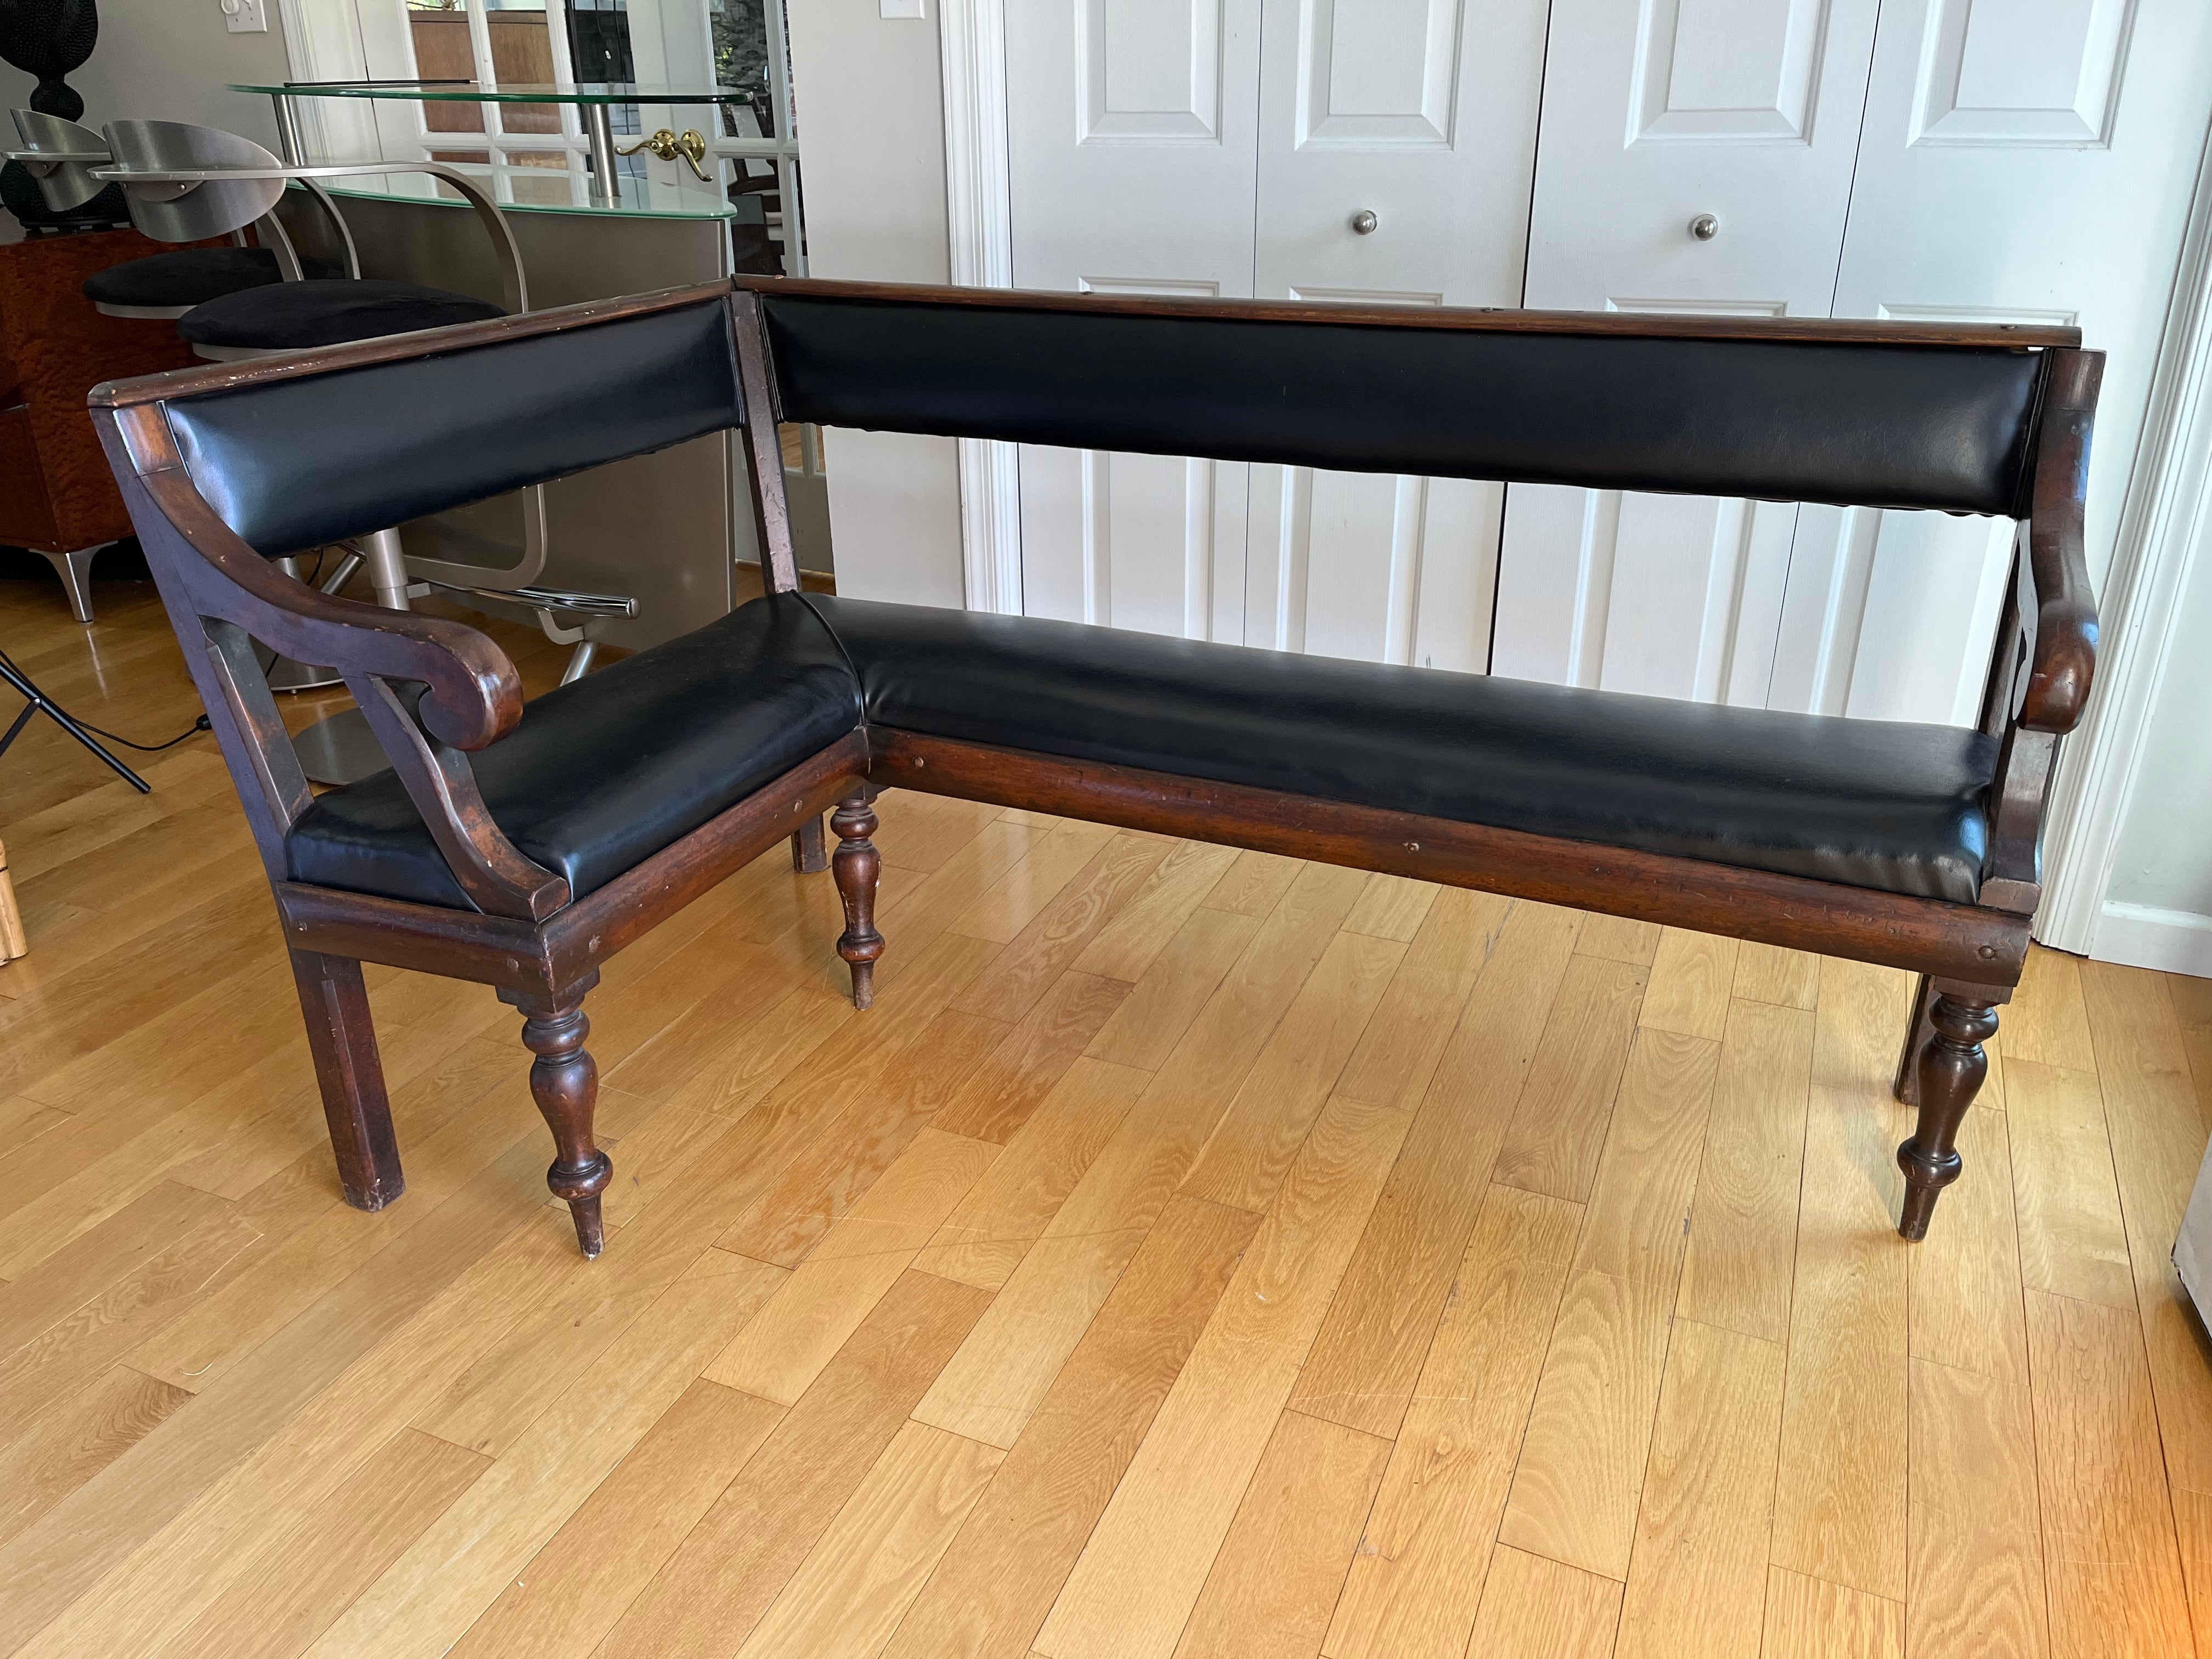 leather banquette bench